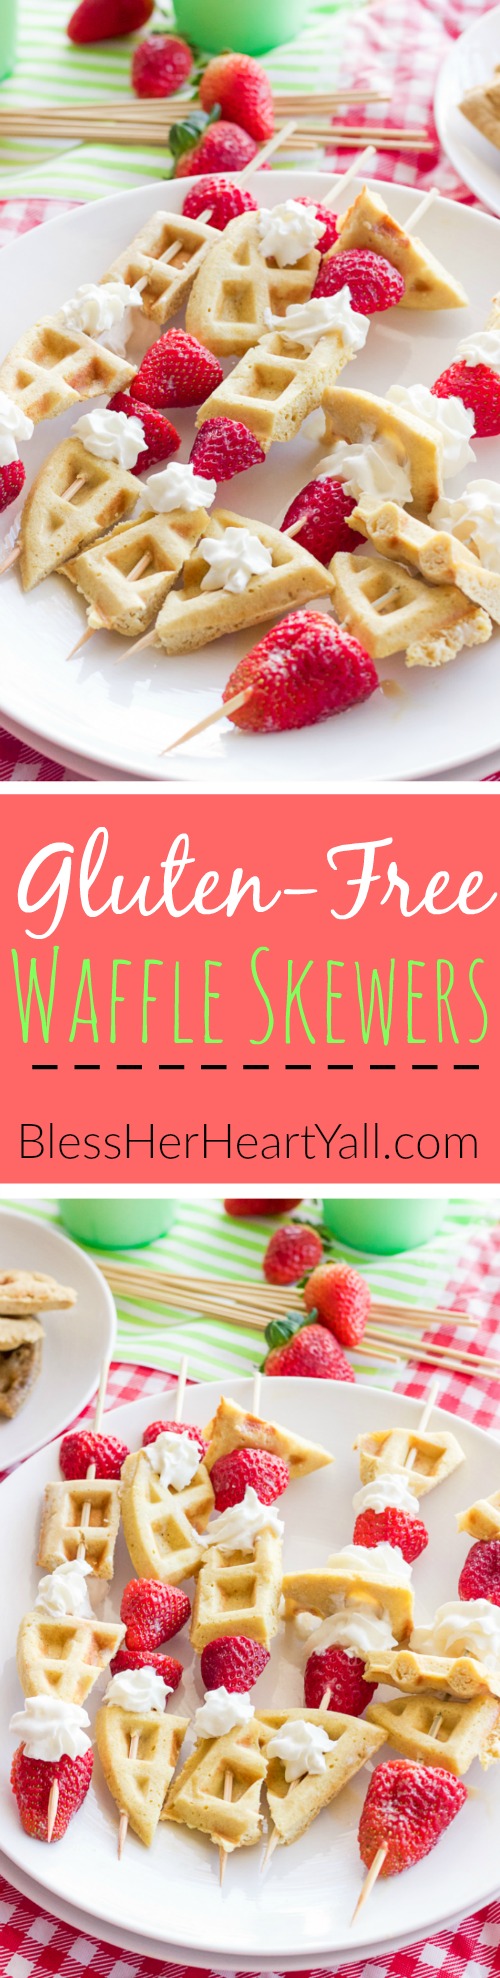 These gluten-free waffle skewers make breakfast fun and tasty. The sweet brown sugar waffles go great with fresh berries and creamy whipped cream. And the best part? Breakfast is on a stick!